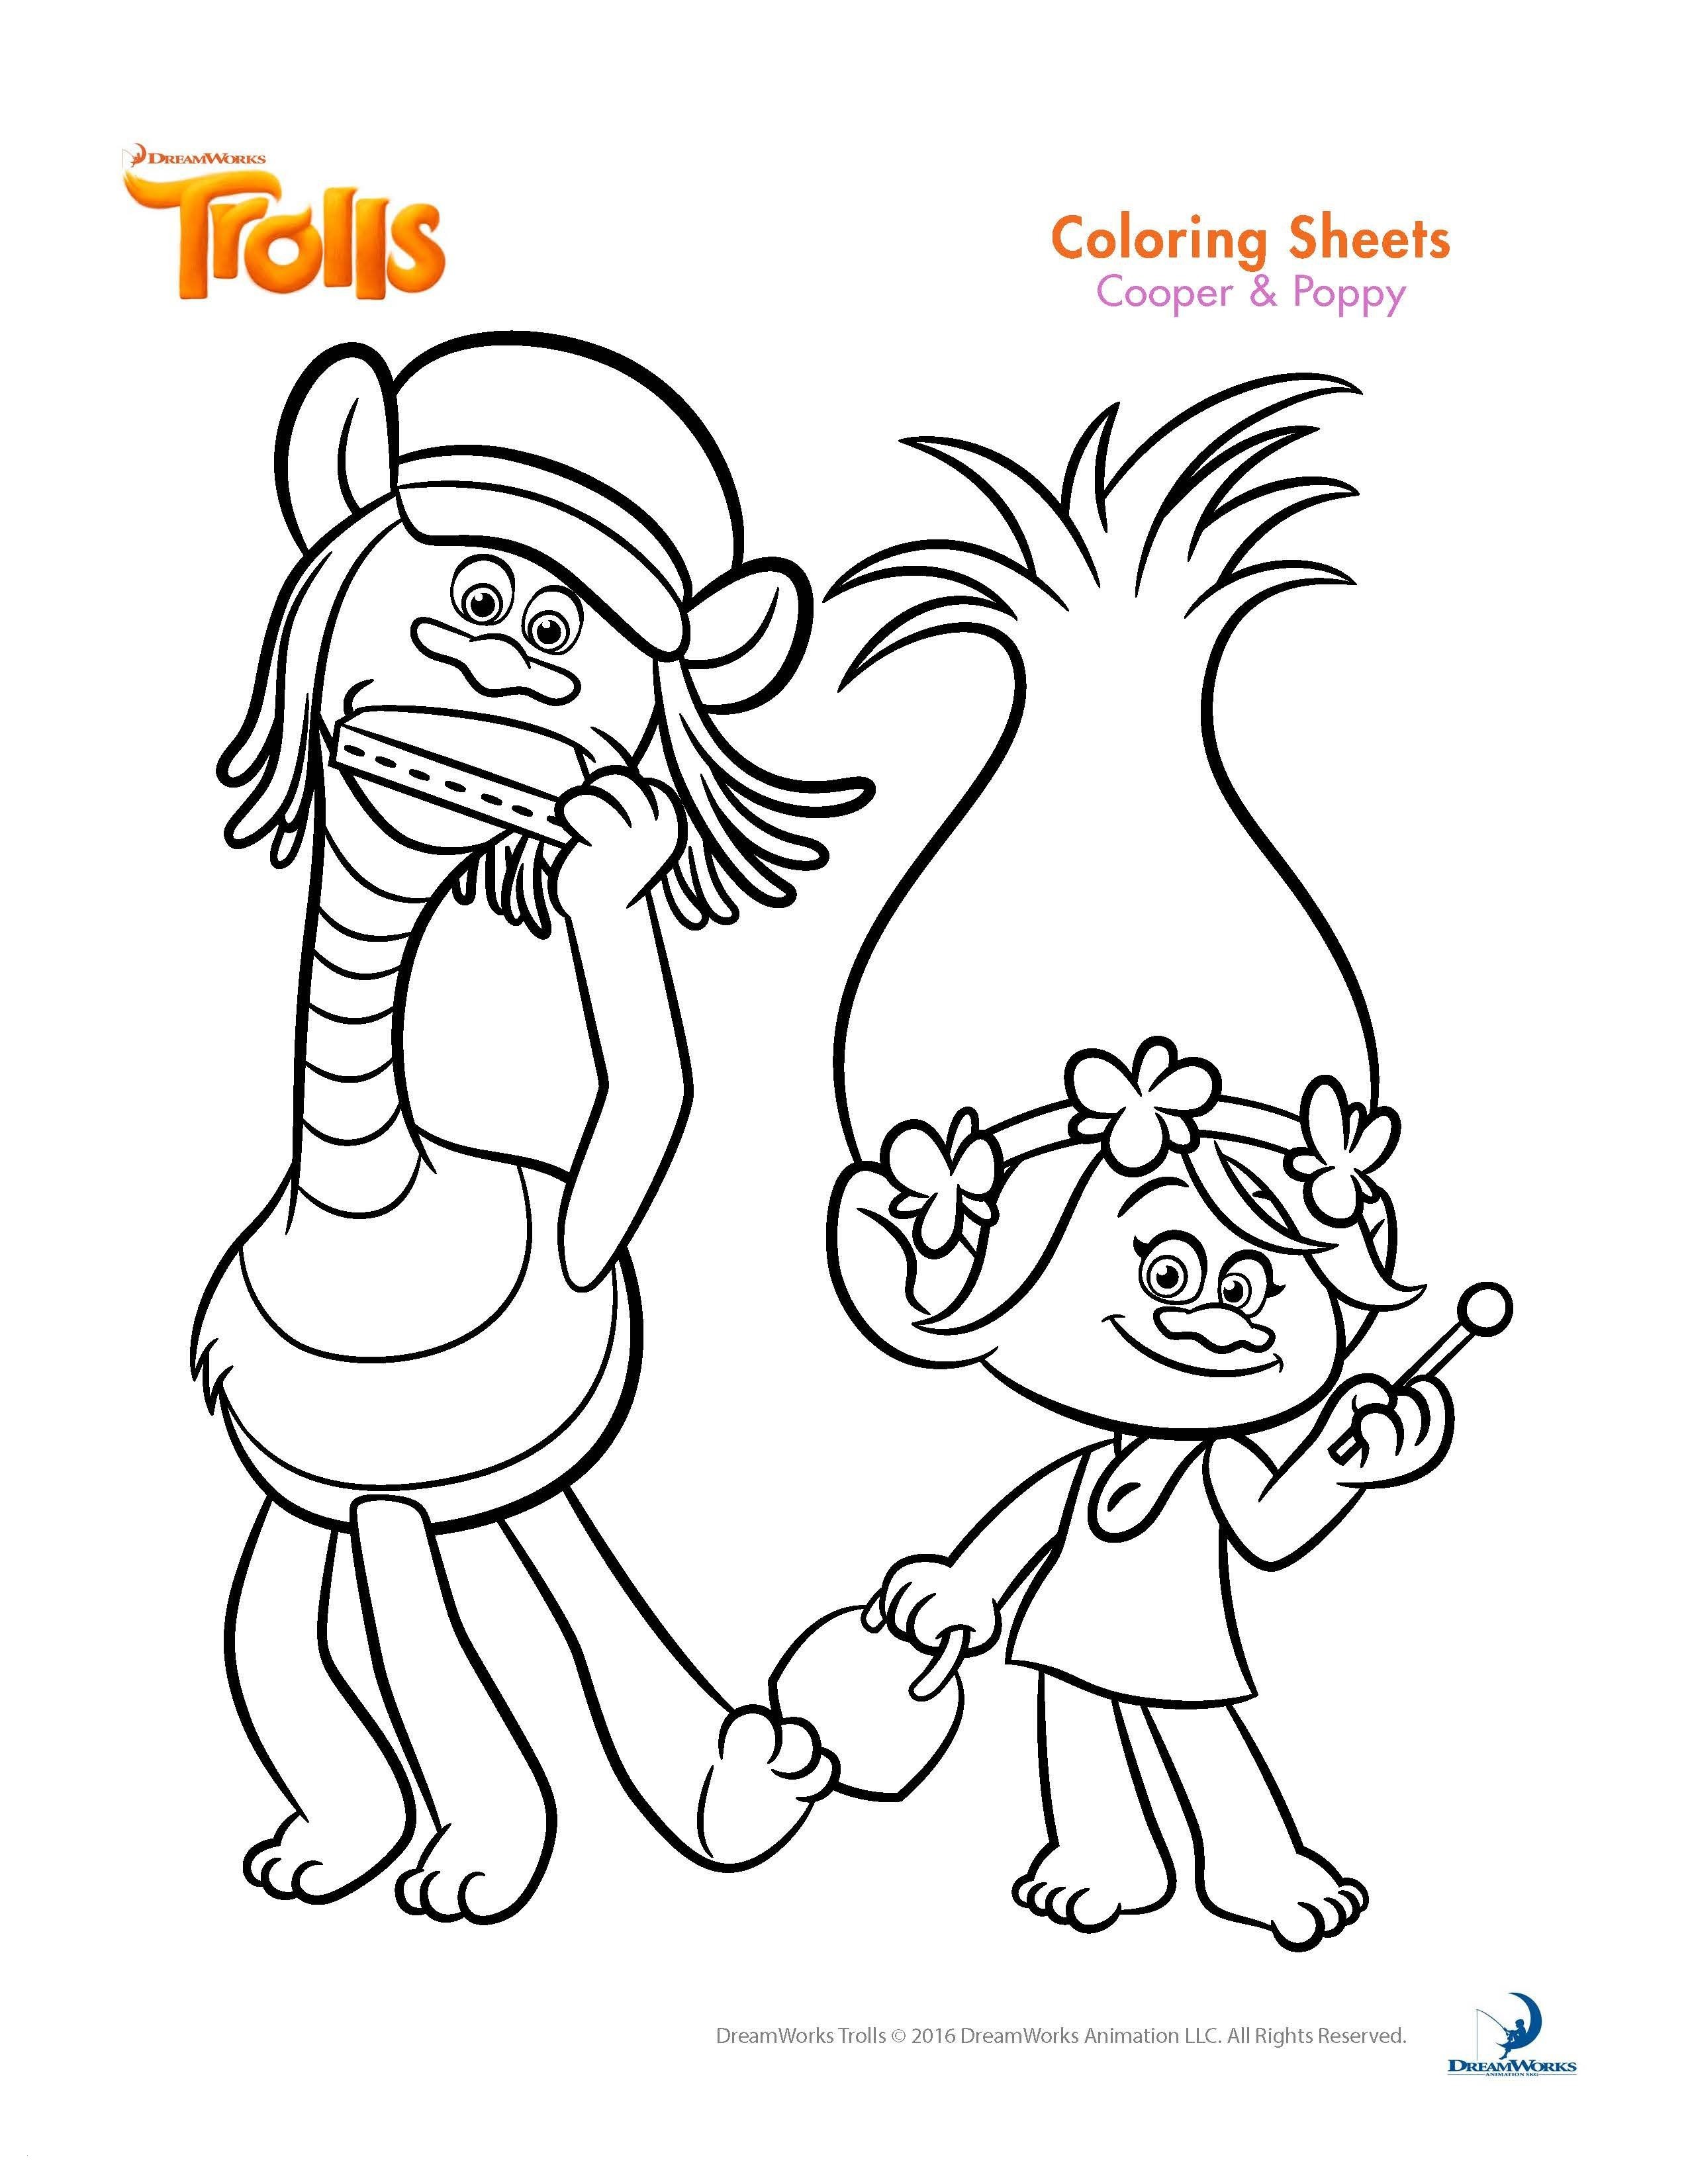 Trolls Movie Free Coloring Pages Unique Movie Coloring Pages Unique Trolls Coloring Sheets and Printable